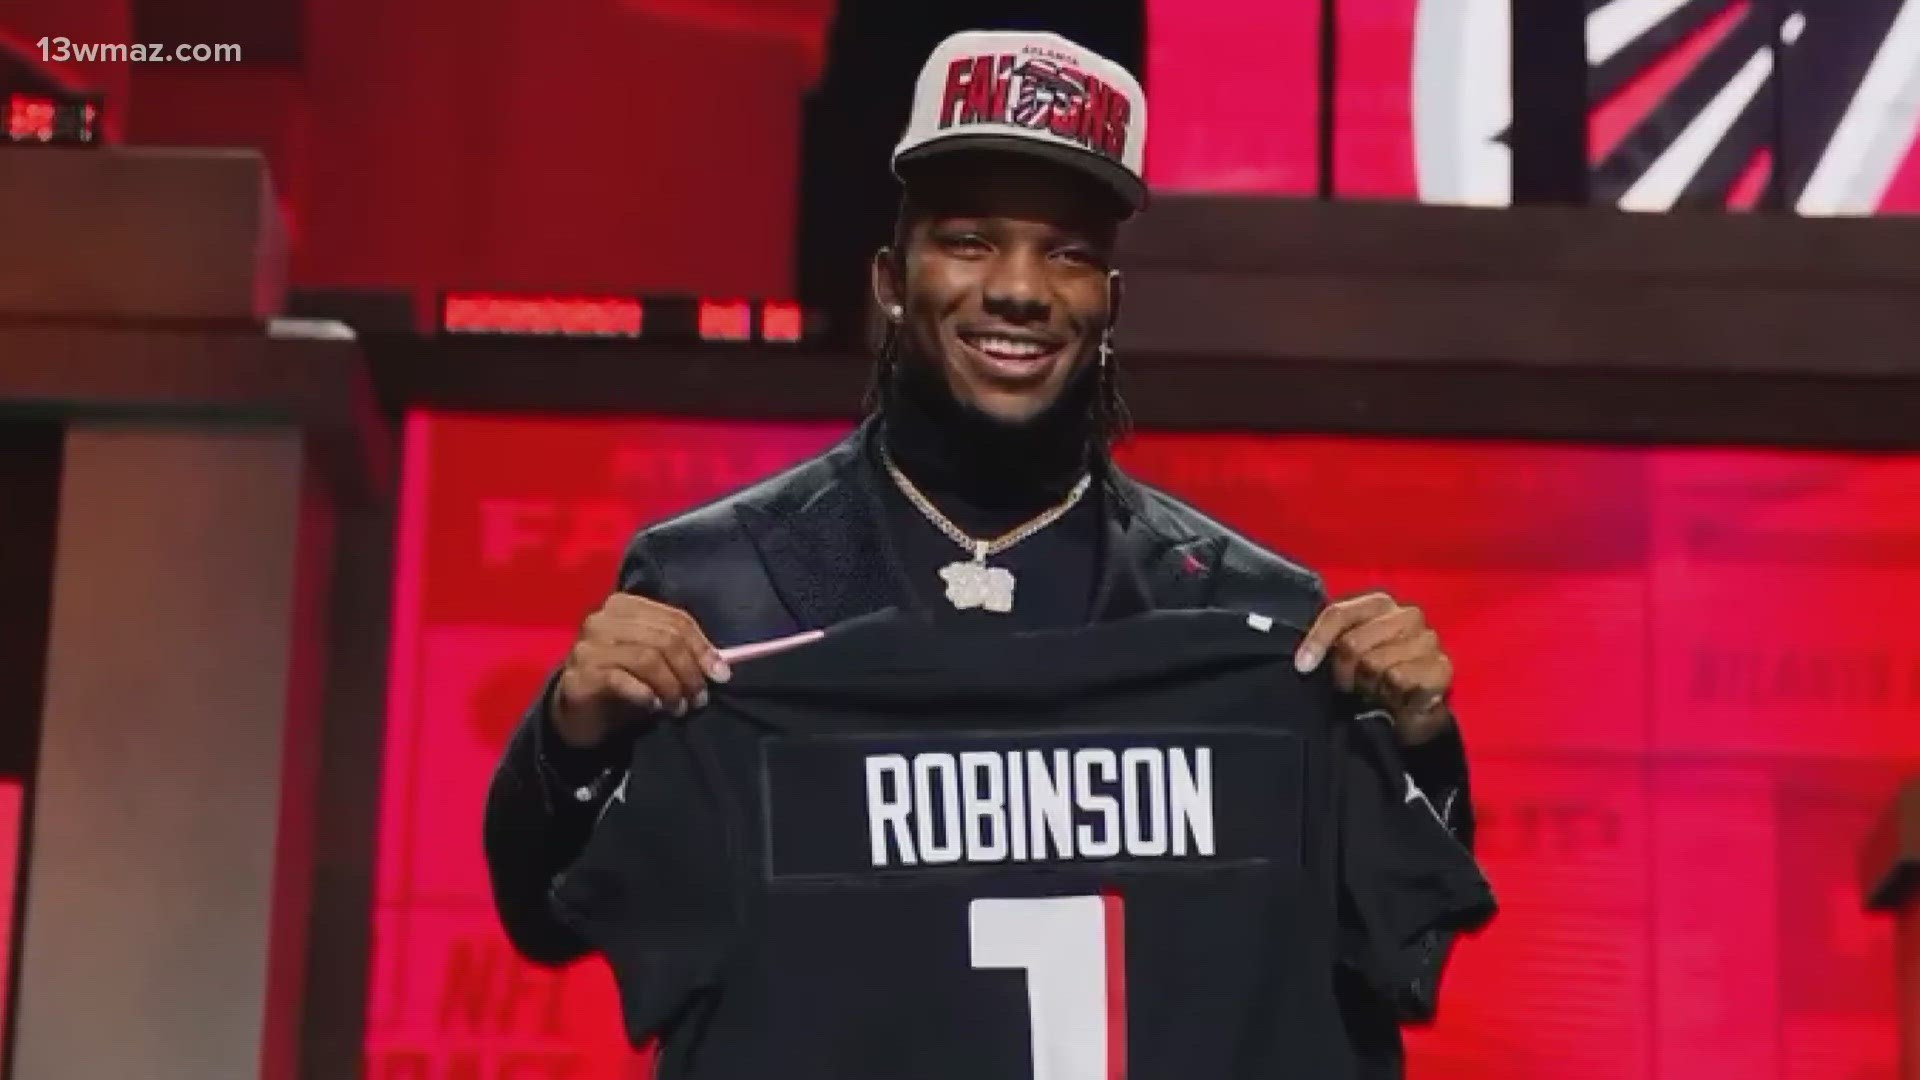 Let's talk football. Last week in the NFL Draft, Falcons went running back in round one with Bijan Robinson. Did they get it right?